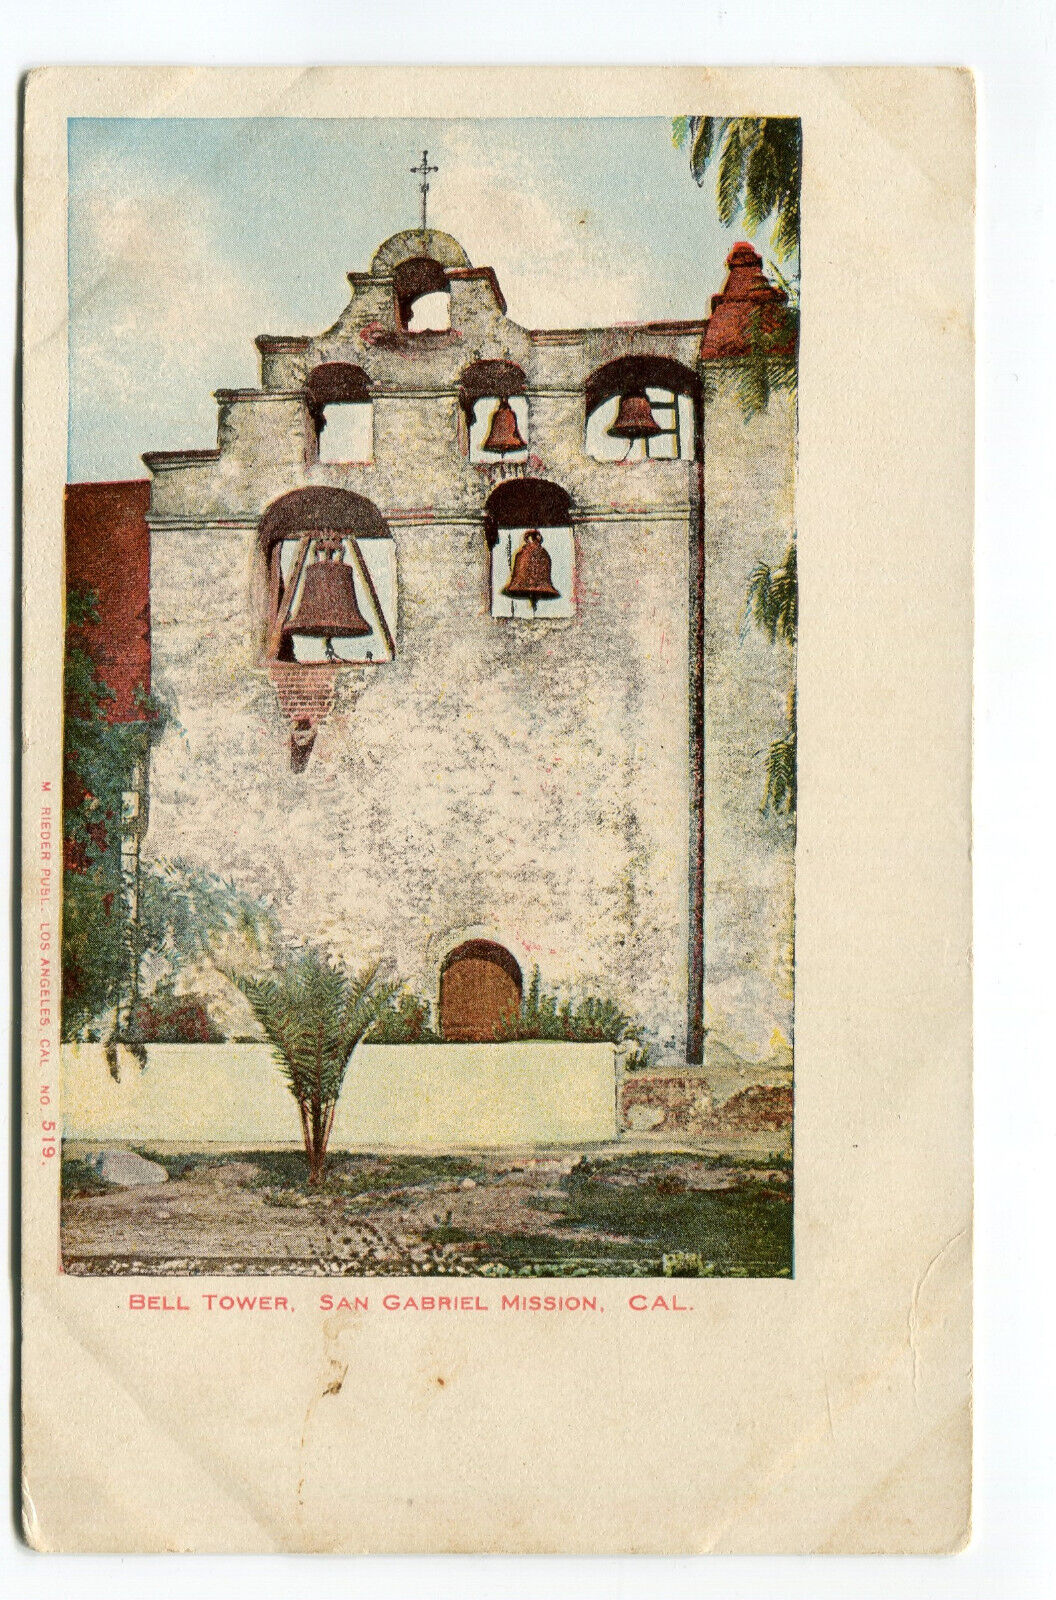 BELL TOWER SAN GABRIEL MISSION CAL - LOT OF 1